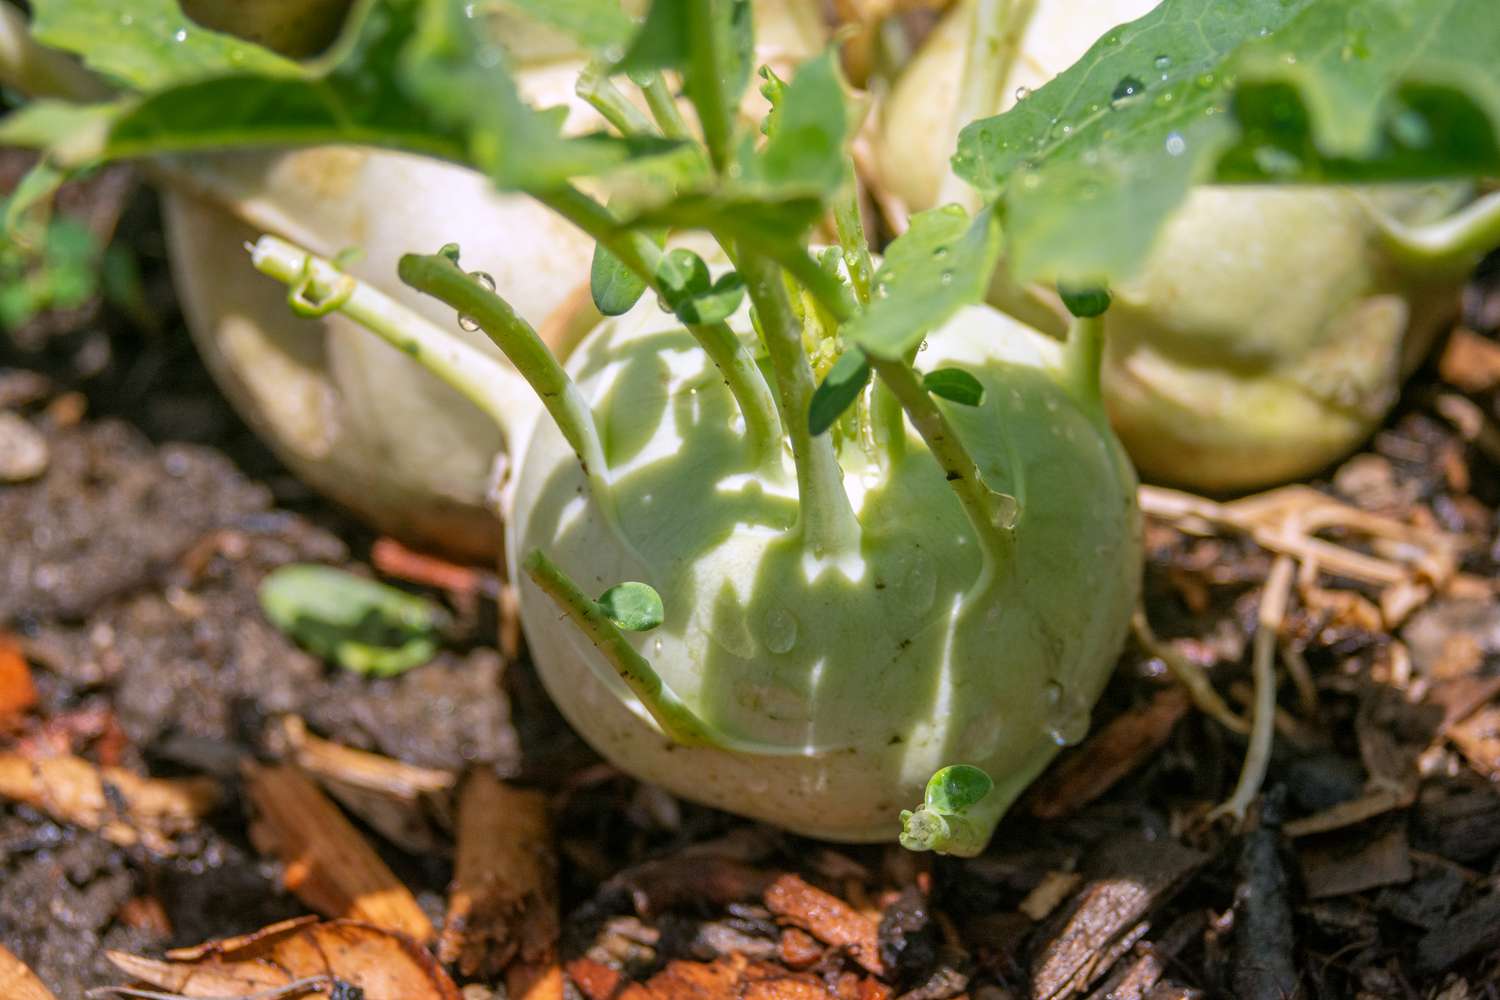 Kohlrabi plant with stems growing from vegetable on garden bed